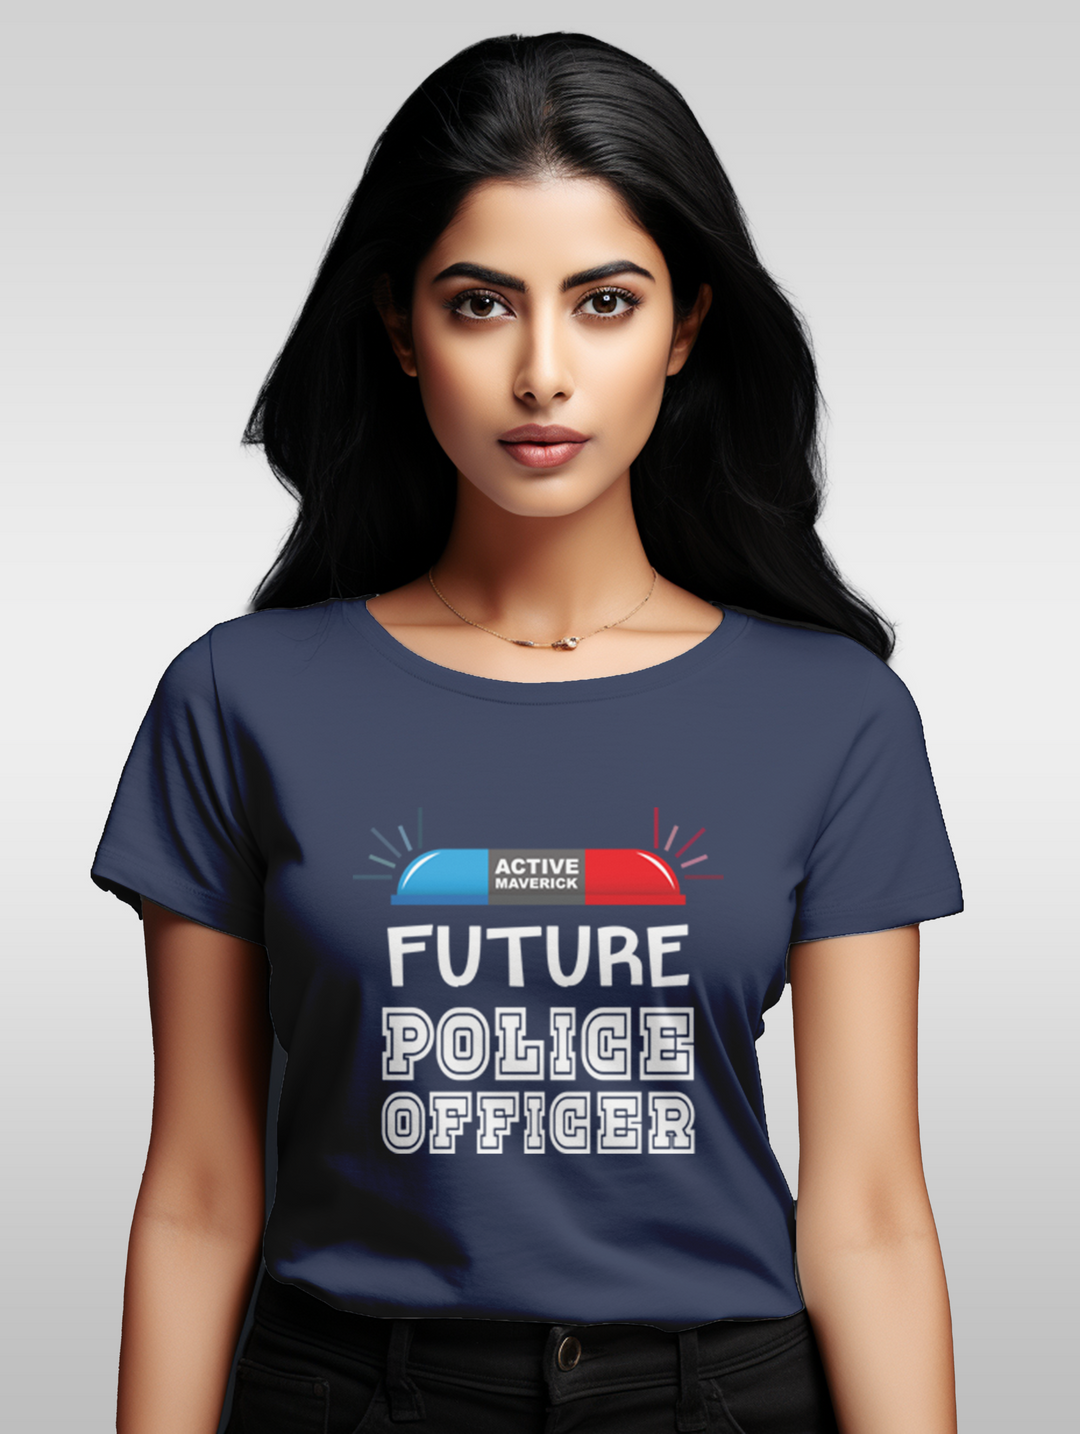 Women's Future Police Officer